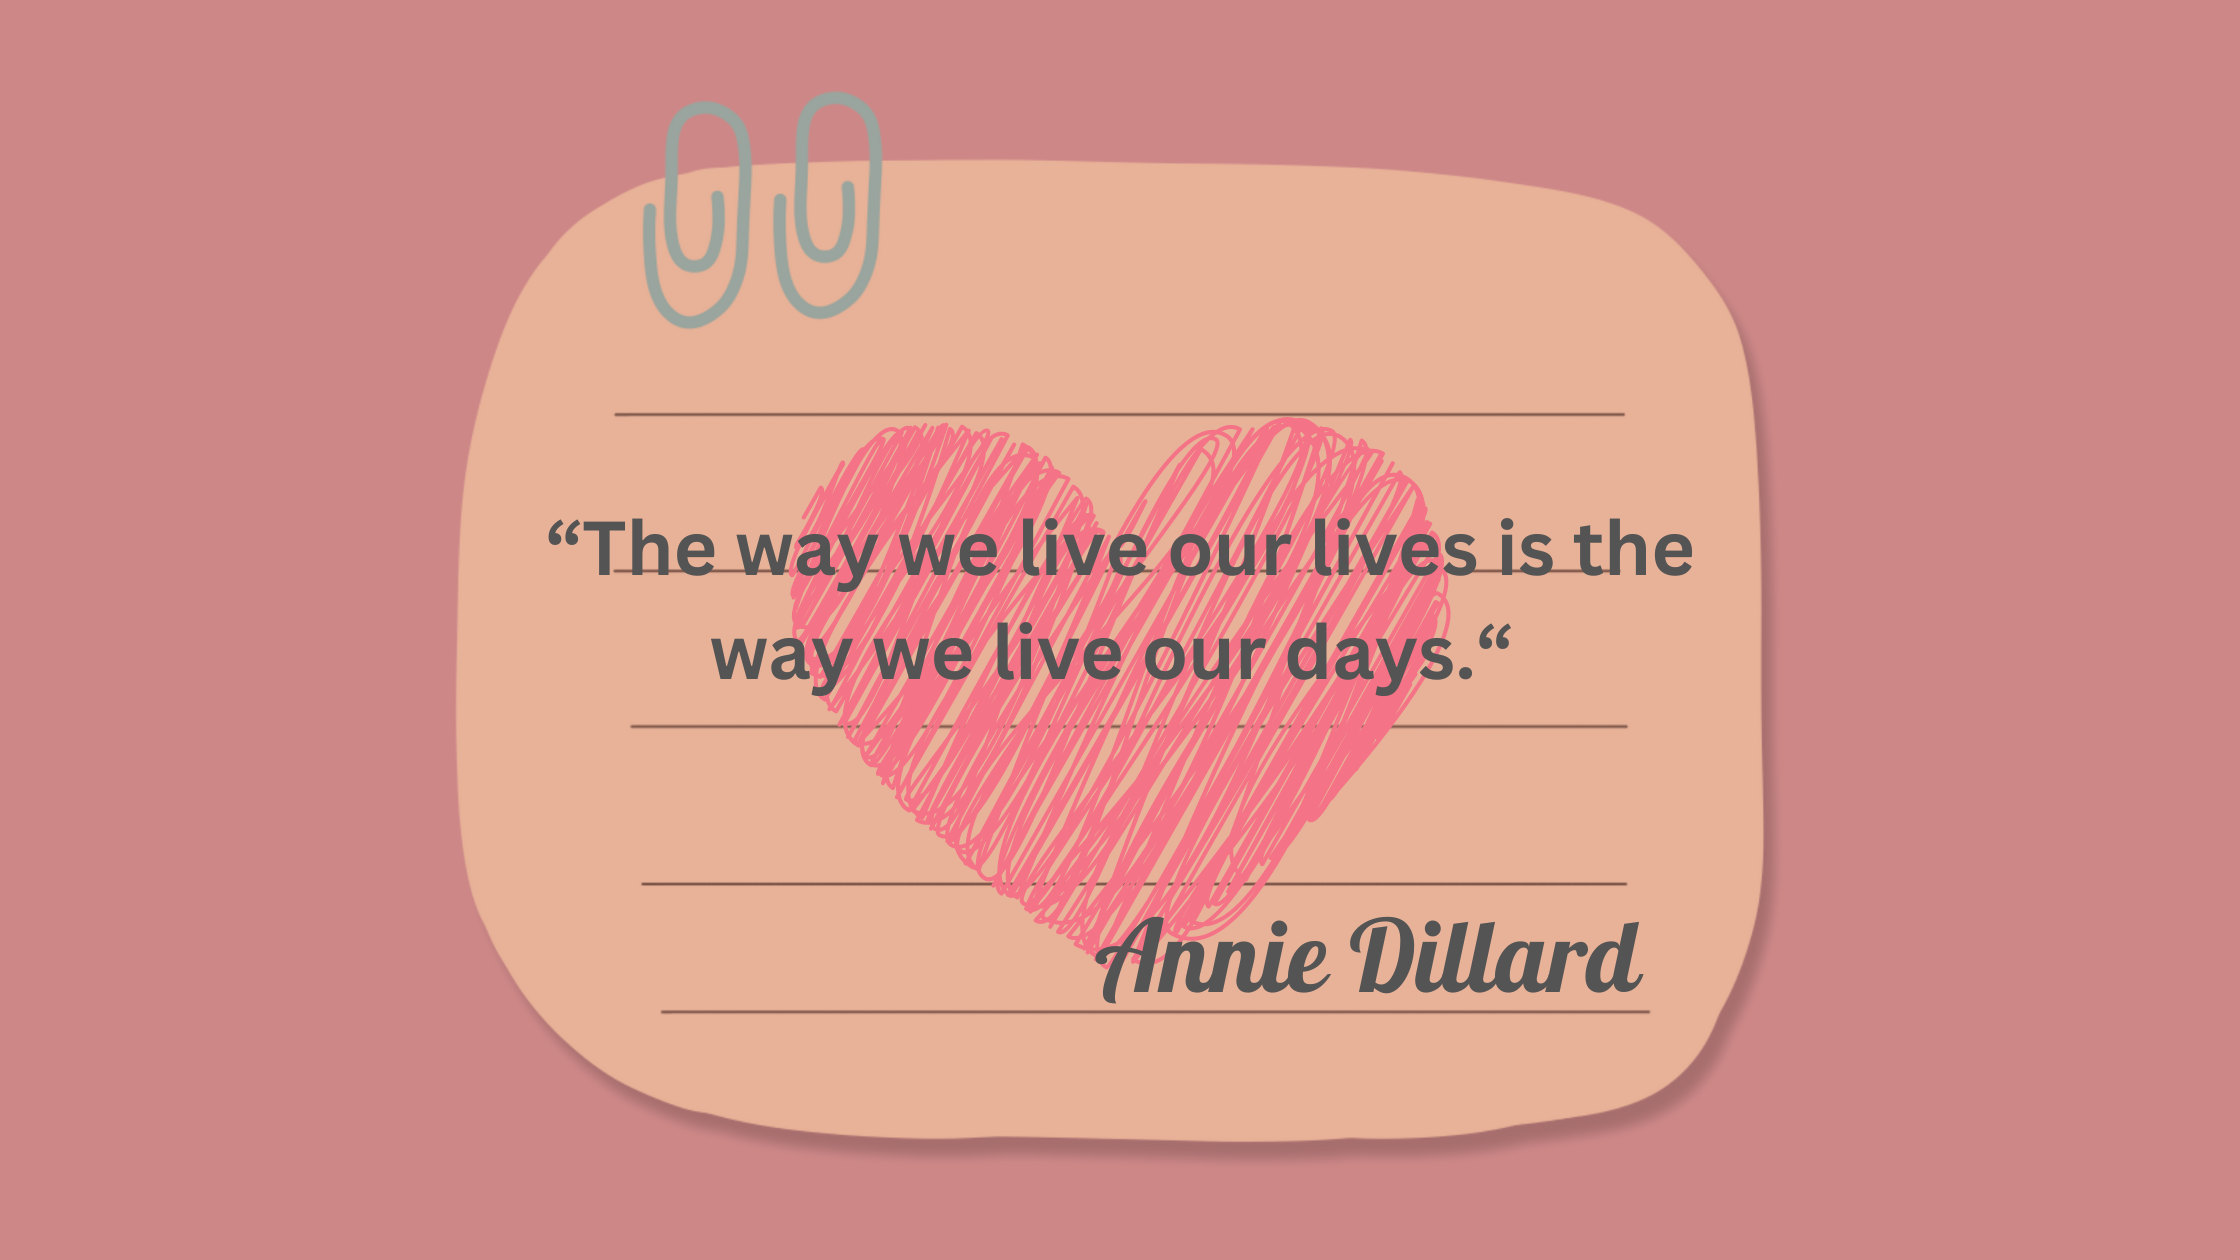 “The way we live our lives is the way we live our days.“